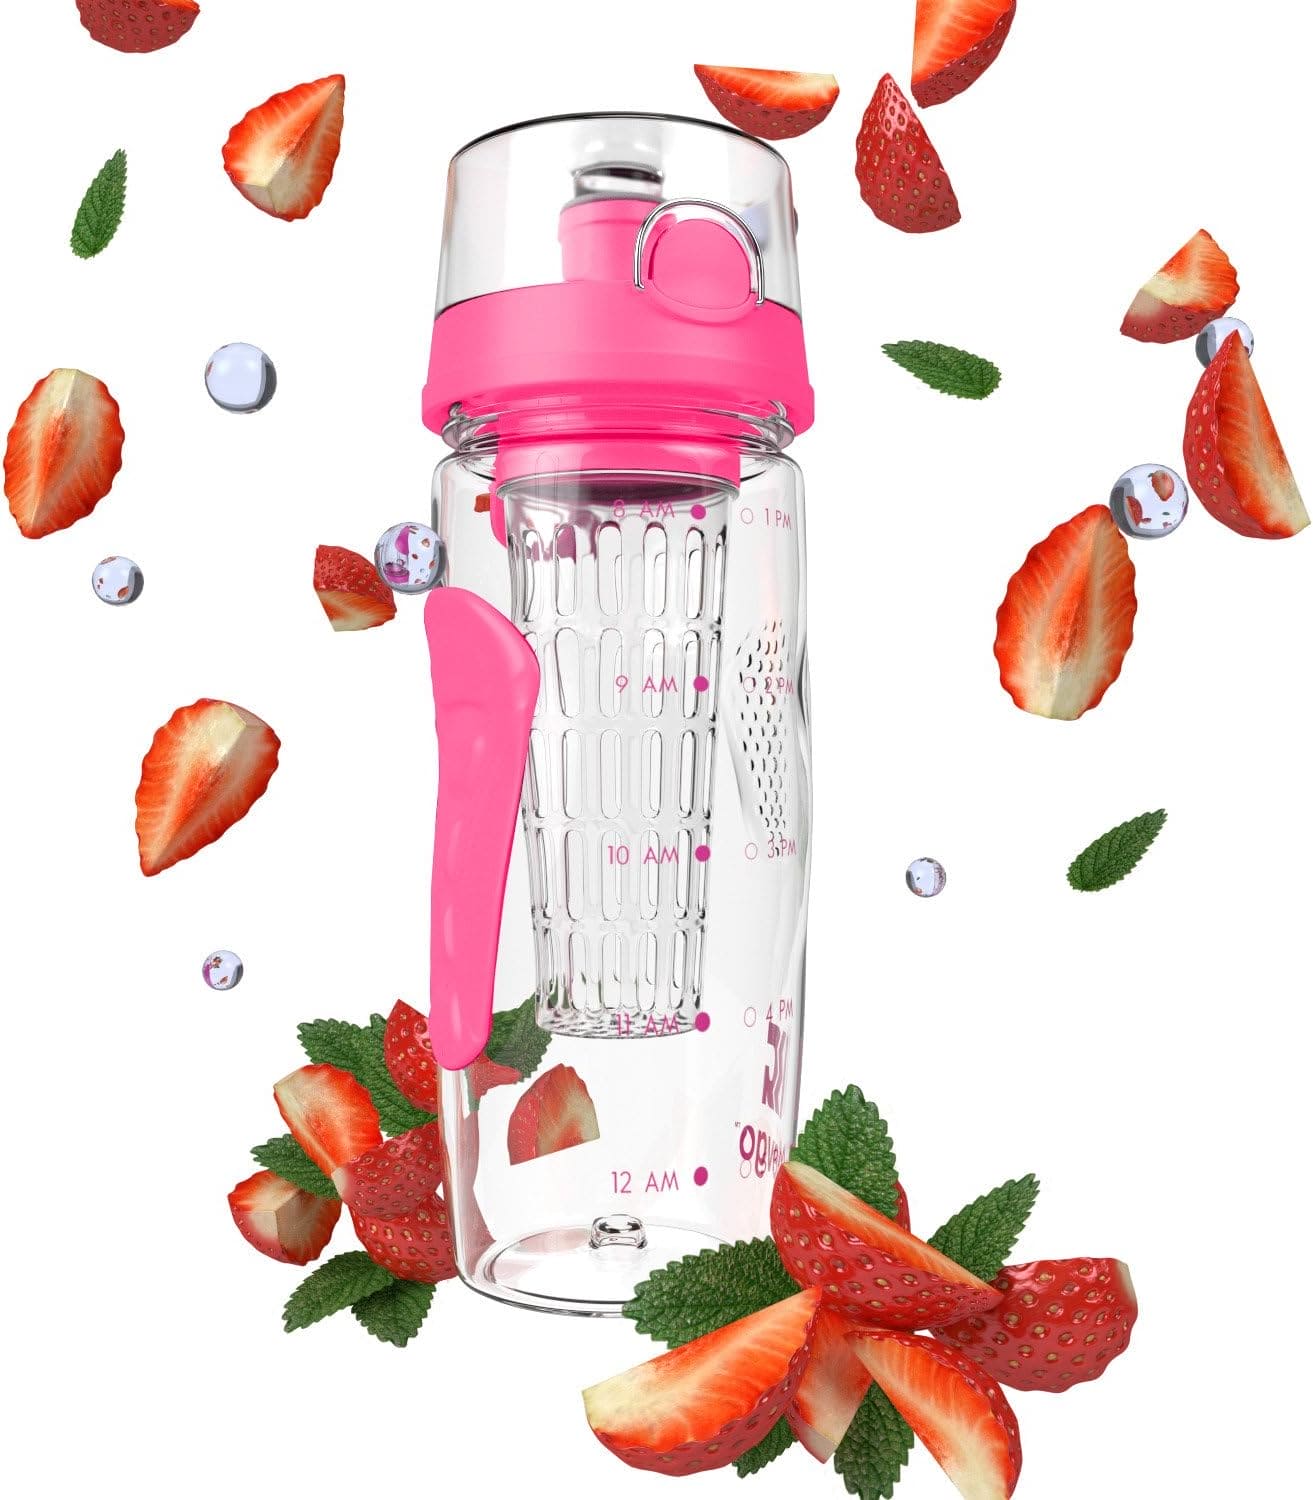 Aqua Time Infuser Water Bottle, 1L Time Tracker Bottle With Cleaning Brush, Acrylic Detox Sports Water Bottle, Triton Sports Bottle with Flip Top Lid, Fruity infusing Water Bottles for Women & Men -